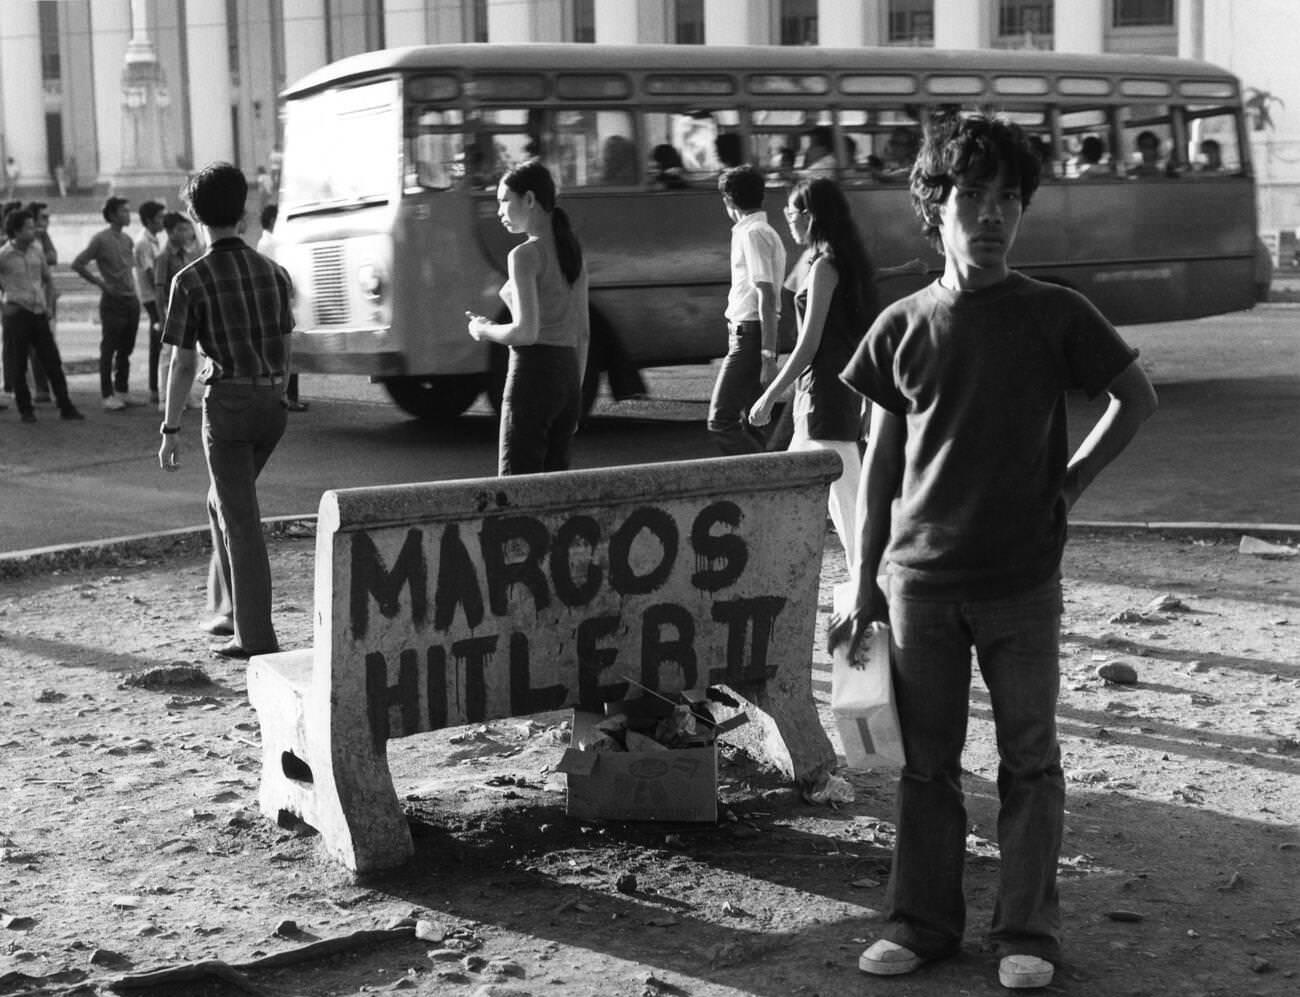 A bench in Manila, Luzon, Philippines, with the slogan "Marcos Hitler II" against President Ferdinand Marcos, 1972.